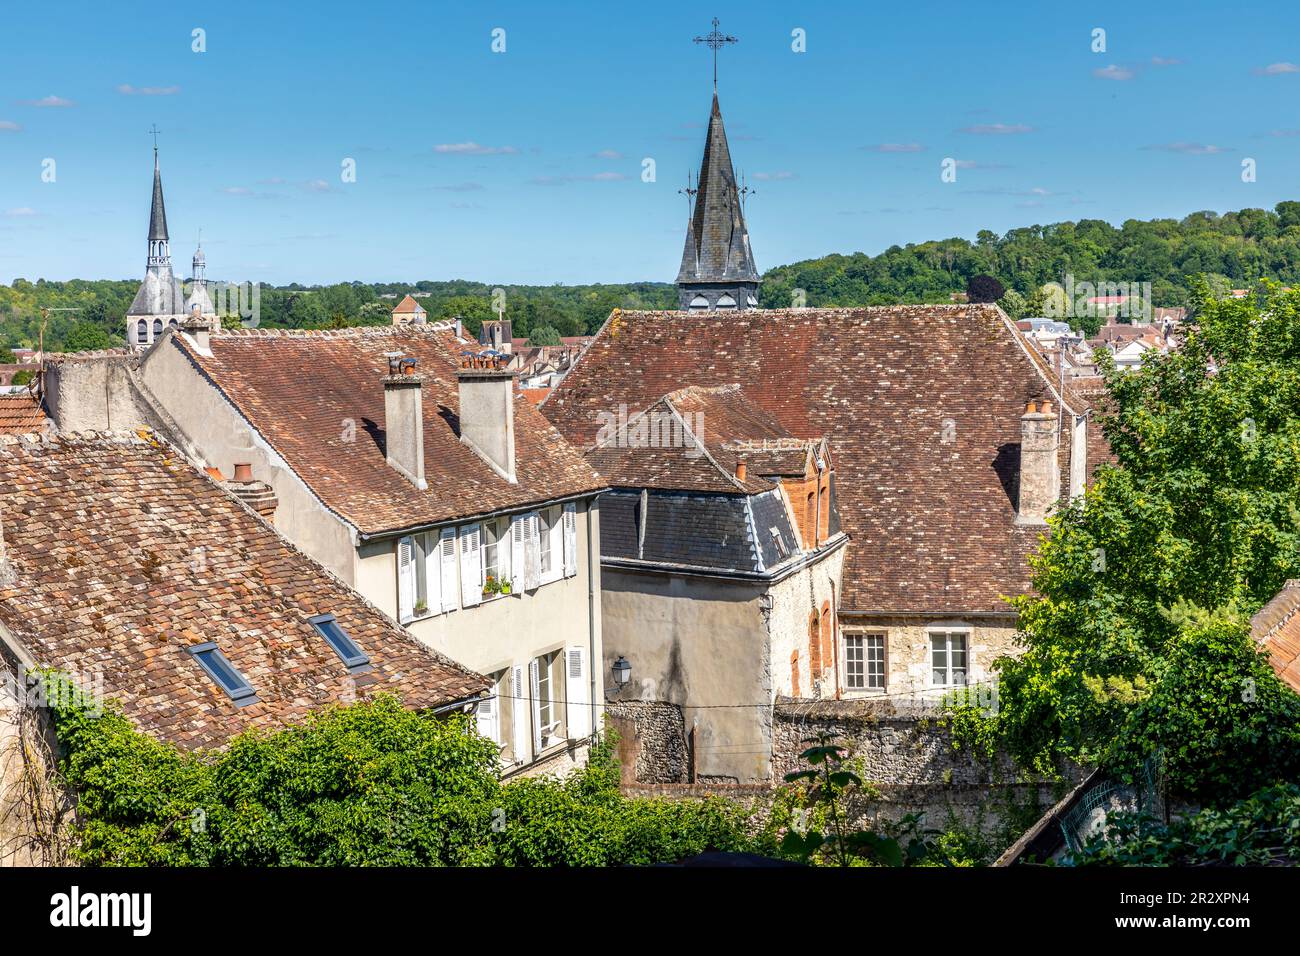 Provins, France - May 31, 2020: Typical buildings and houses in Provins town, medieval village near Paris Stock Photo